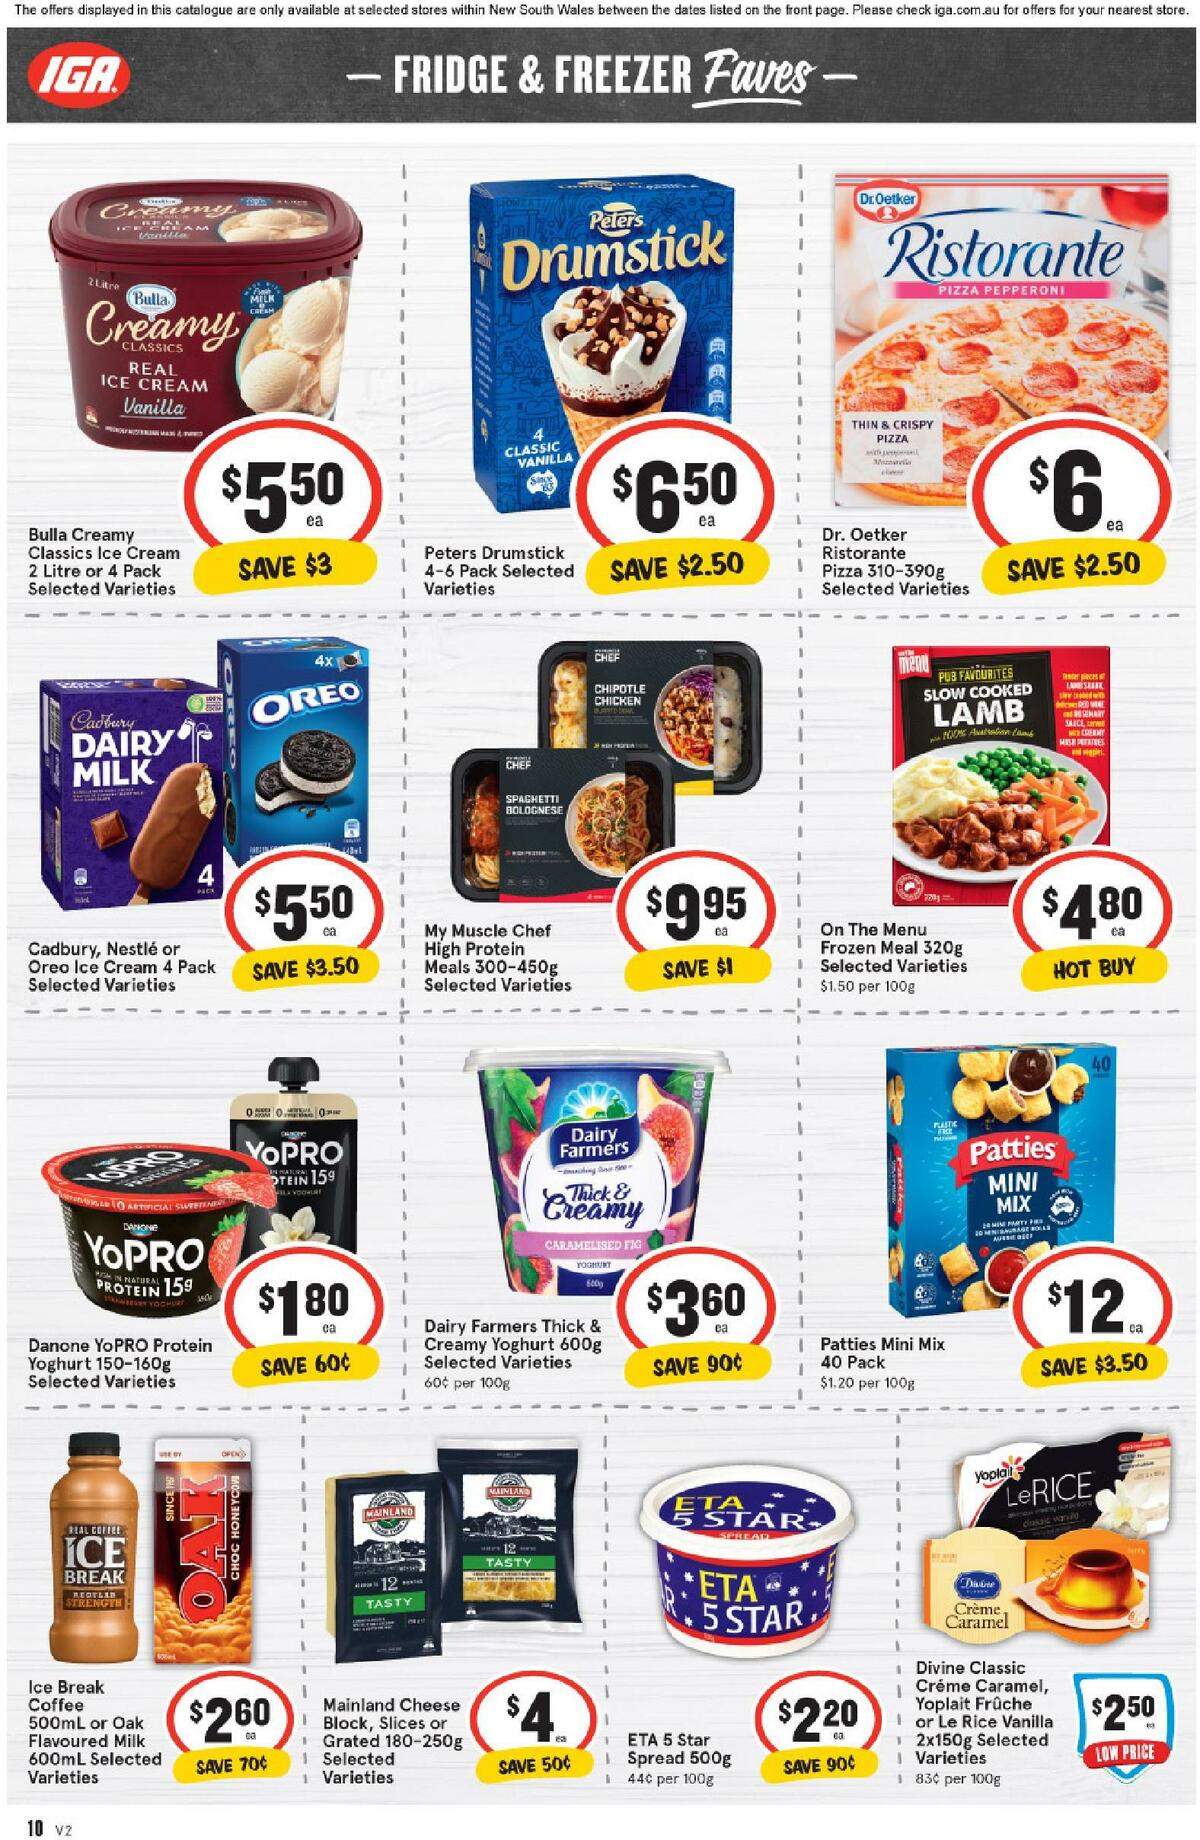 IGA Catalogues from 29 June